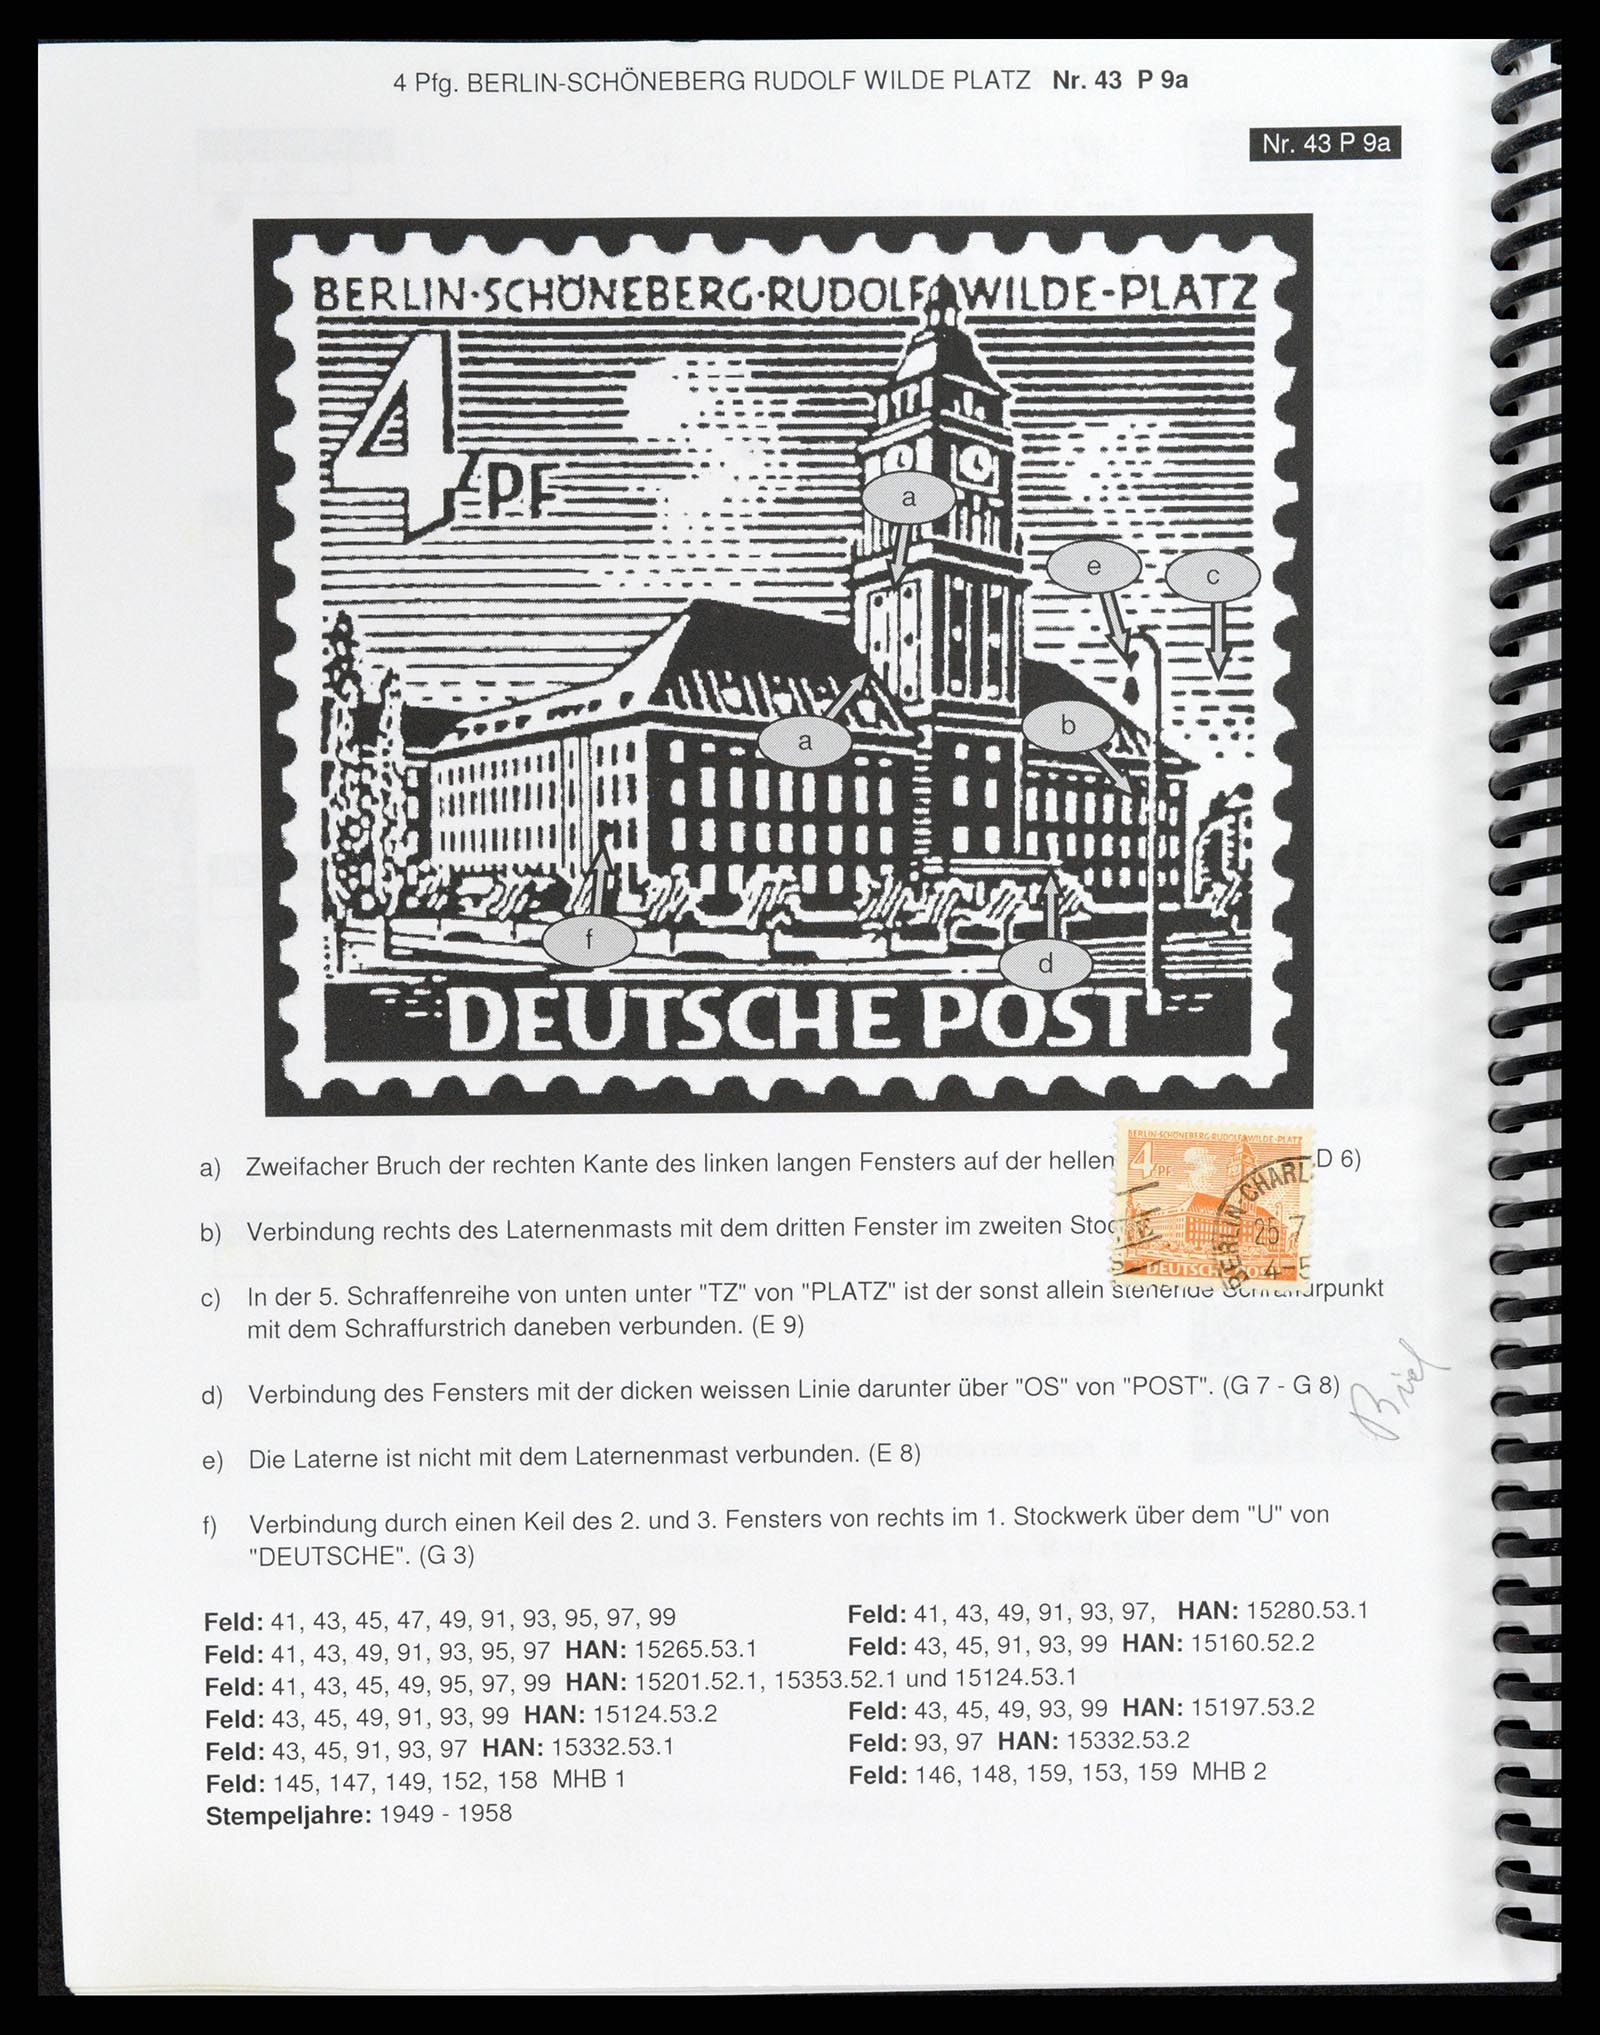 37458 096 - Stamp collection 37458 Berlin plateflaws 1949.